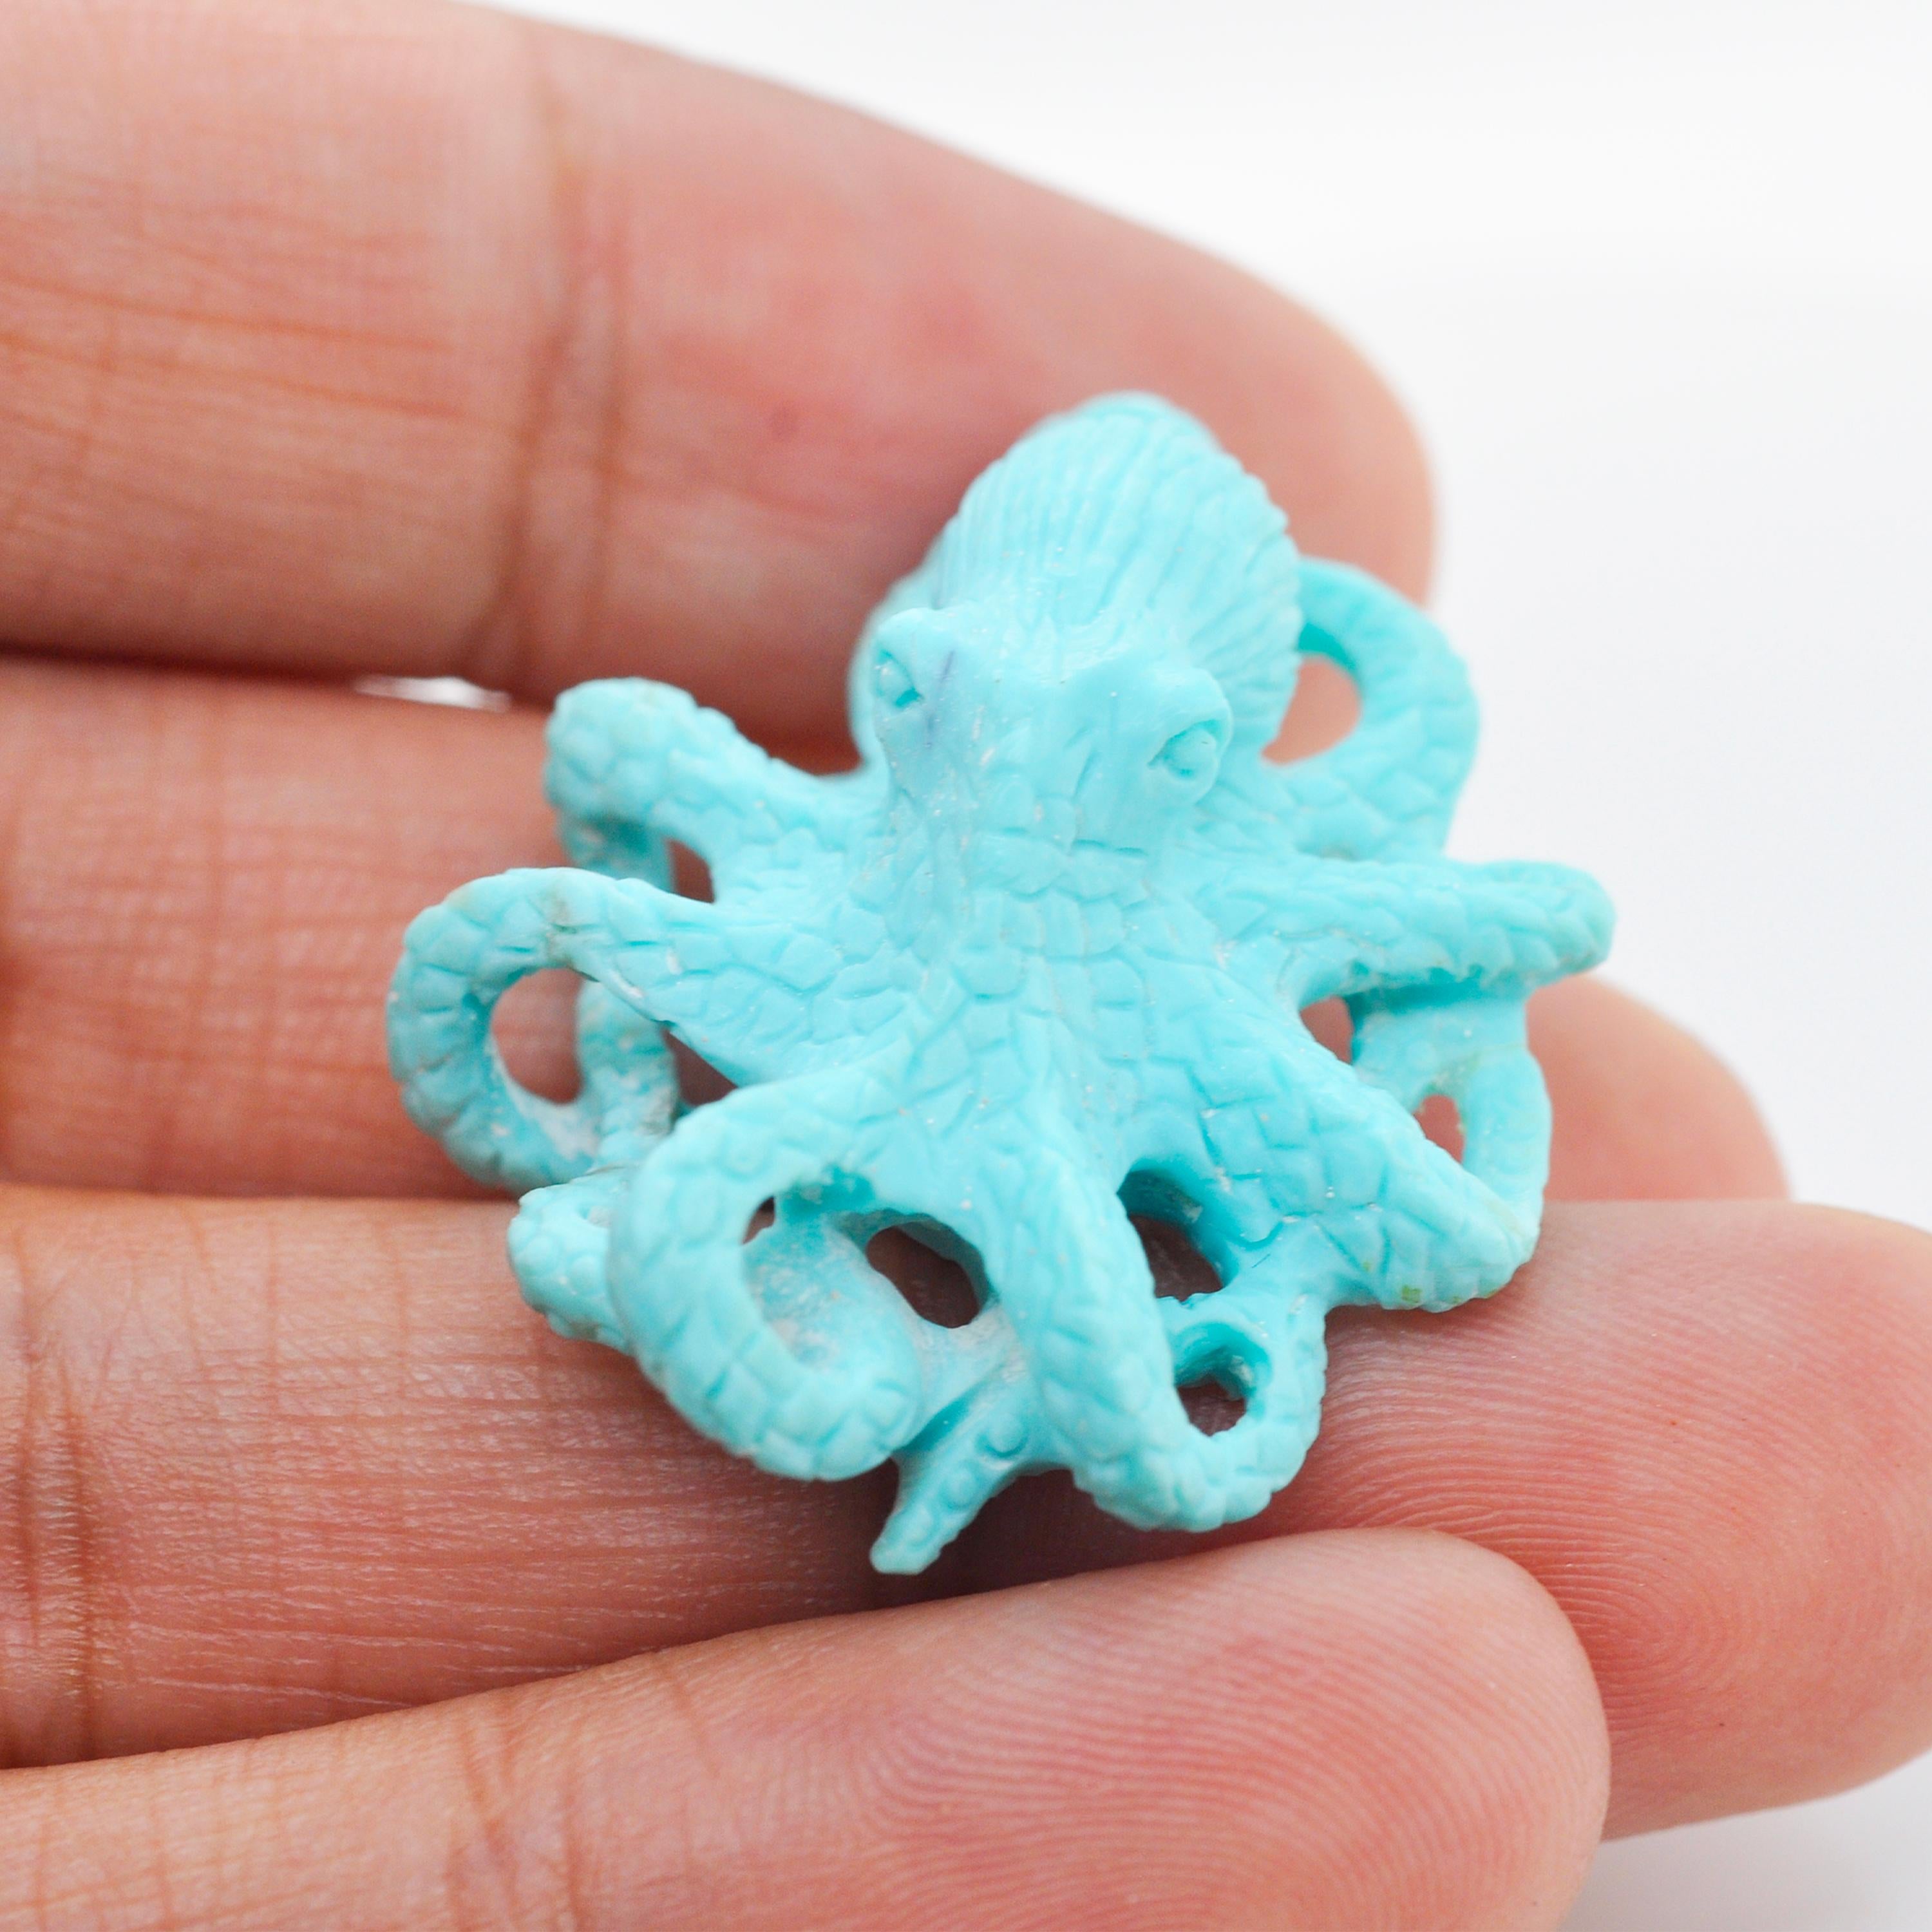 Mixed Cut Hand Carved 31.81 Carat Natural Arizona Turquoise Octopus Carving Pendant Brooch